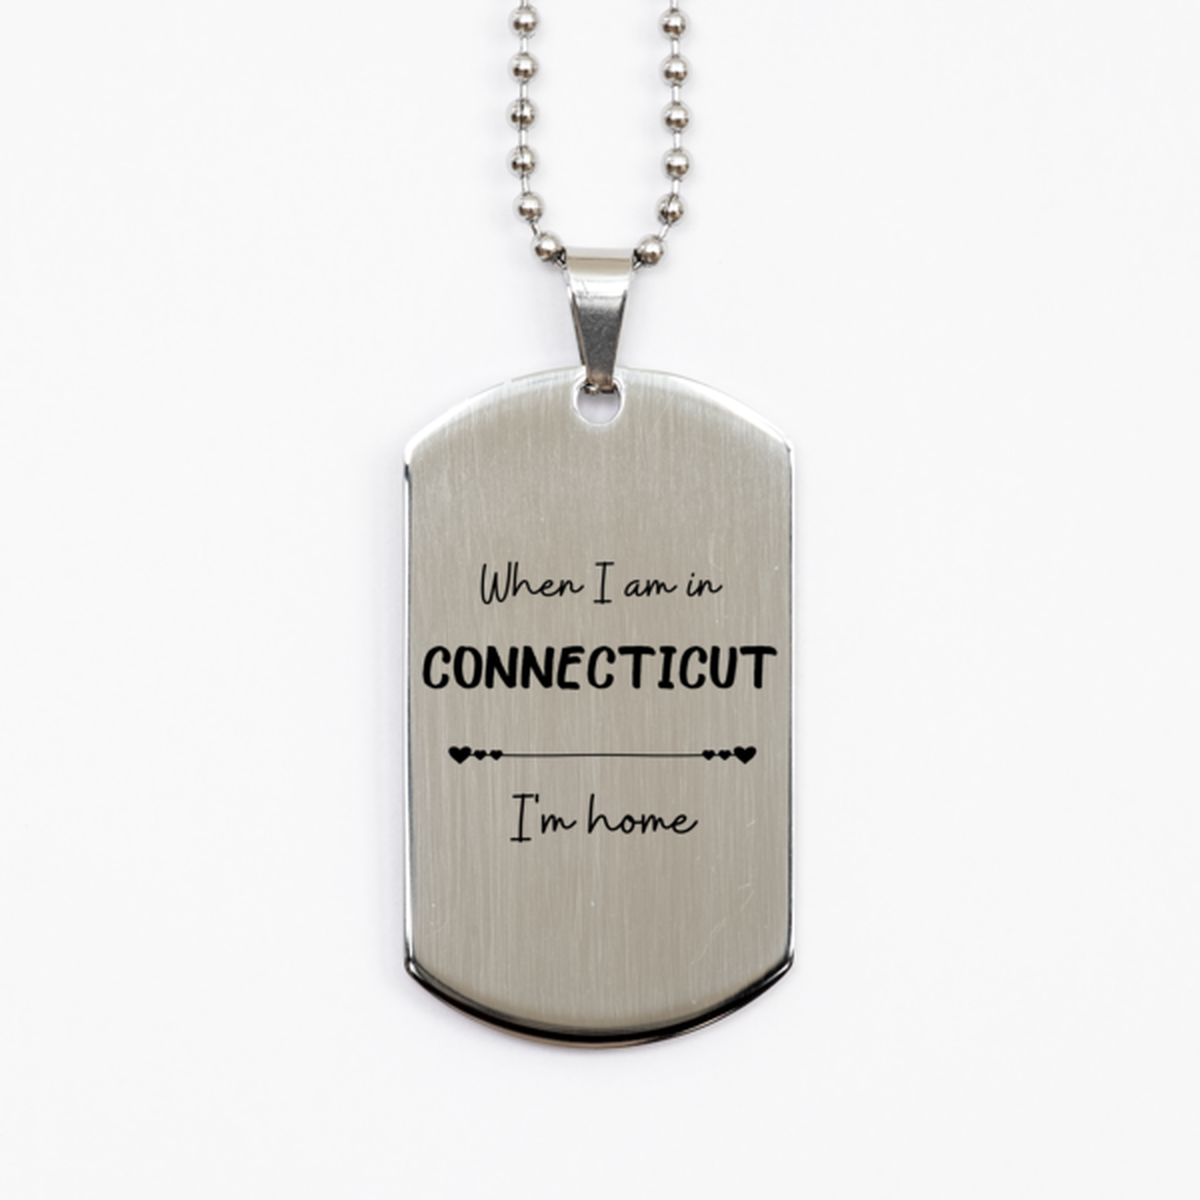 When I am in Connecticut I'm home Silver Dog Tag, Cheap Gifts For Connecticut, State Connecticut Birthday Gifts for Friends Coworker